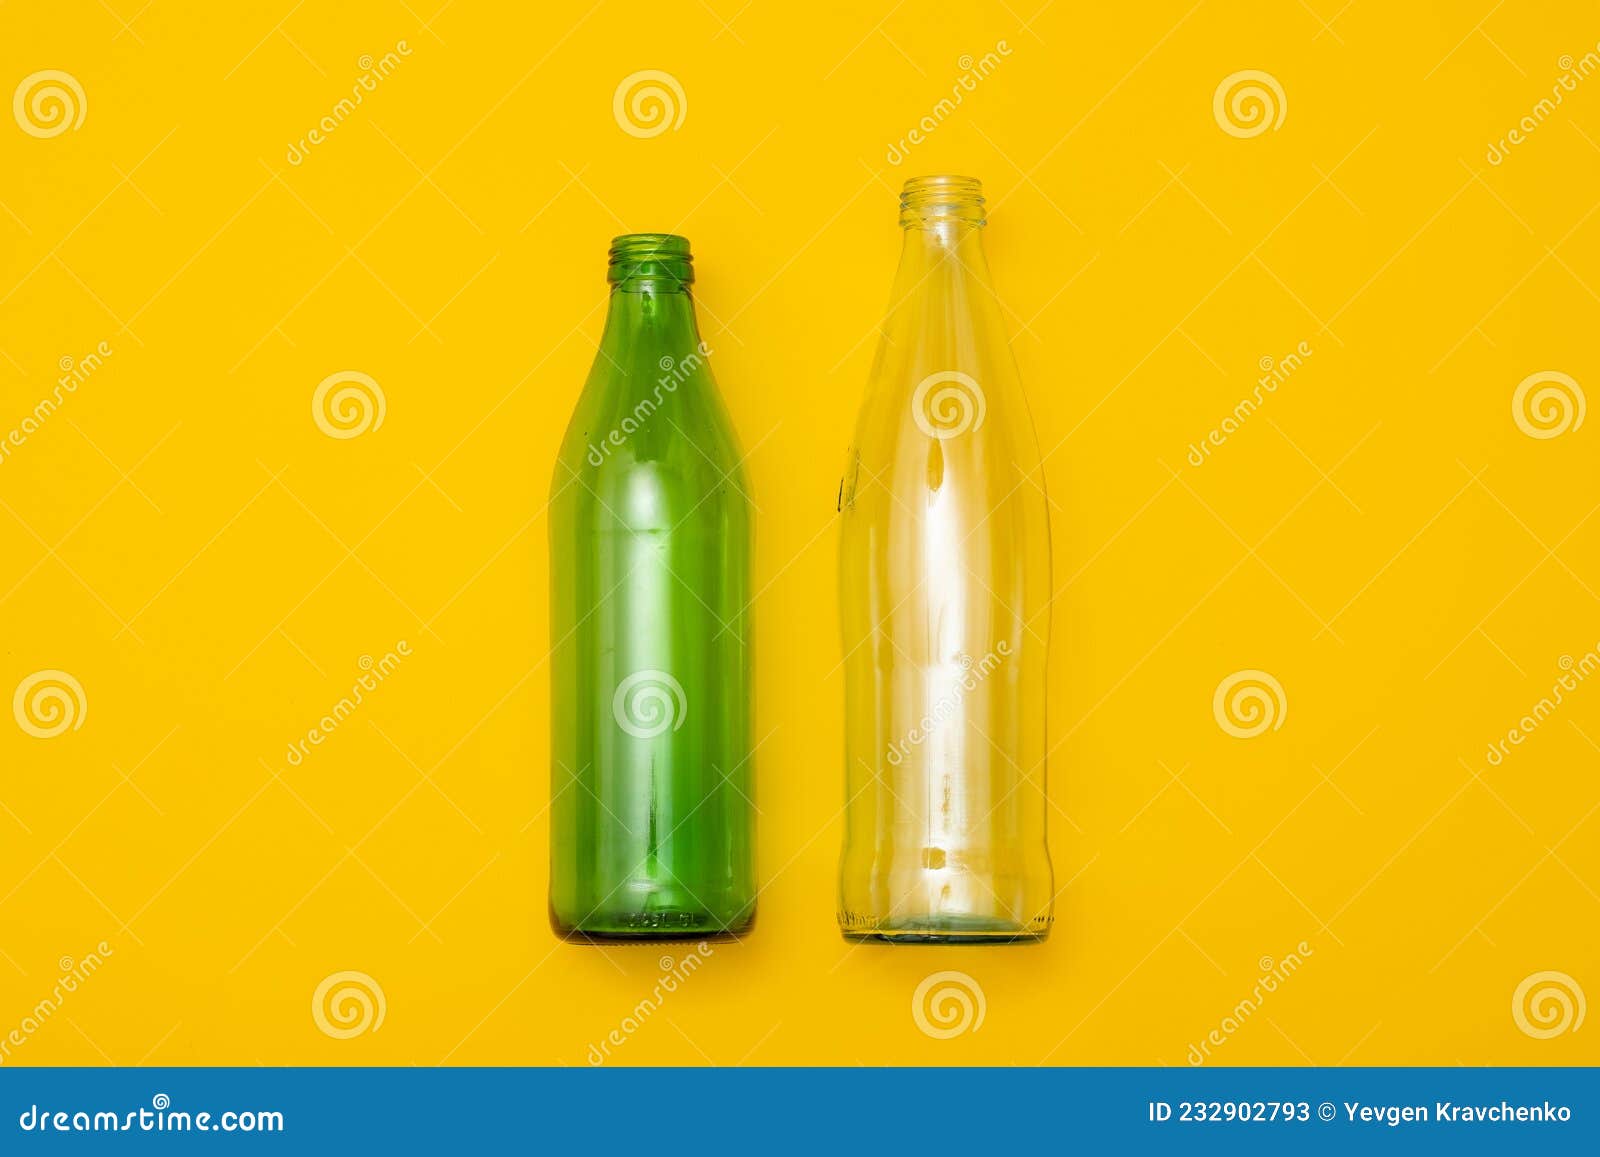 two empty glass bottle on a yellow background. eco-friendly packaging, waste recycling concept, glass waste, rubish sort